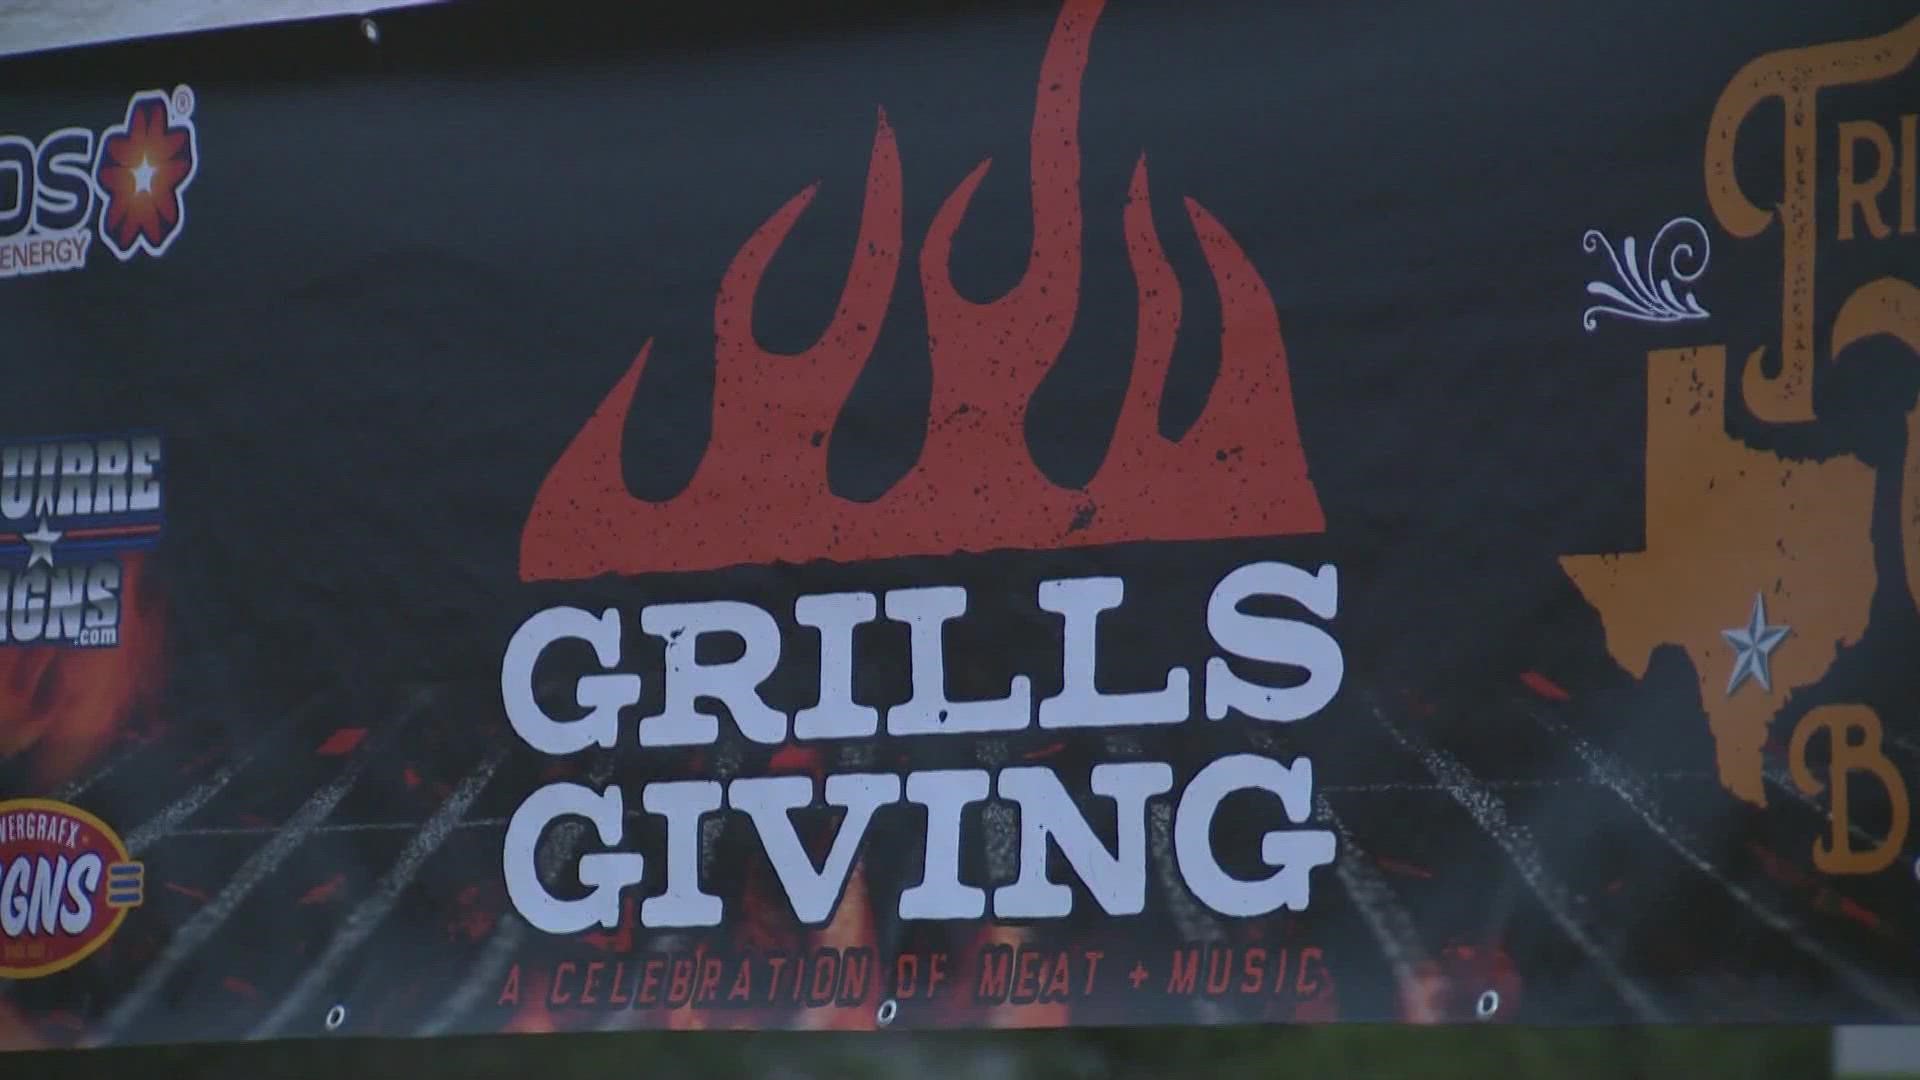 Nearly 30 teams camped out at night to compete for best chicken, ribs, and brisket.